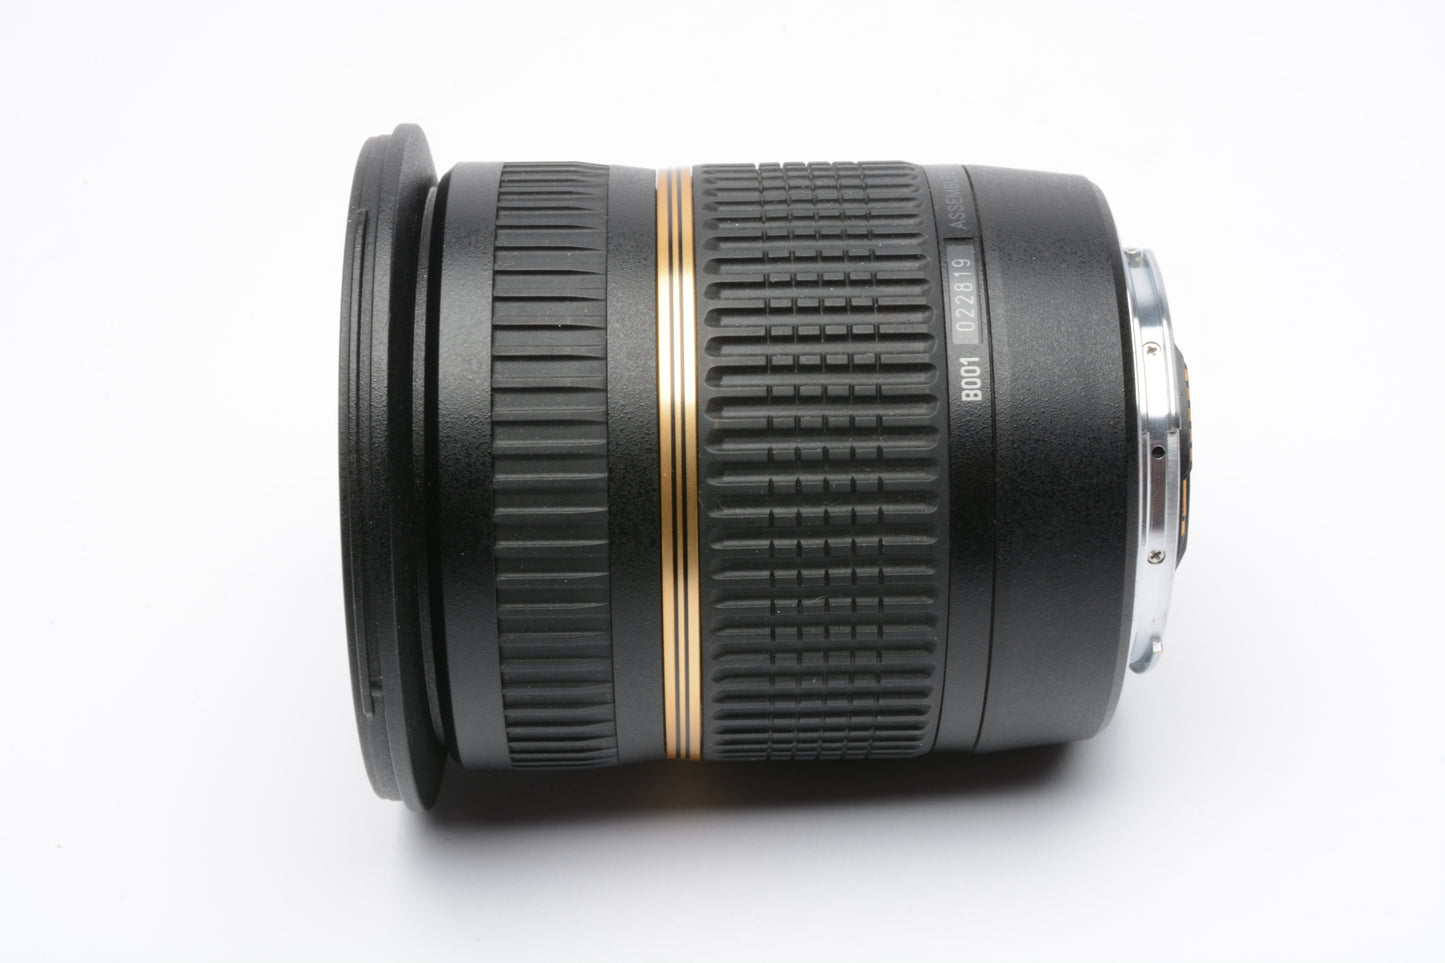 Tamron SP 10-24mm f3.5-4.5 Di II B001 wide zoom for Canon EF, caps, hood, Mint-